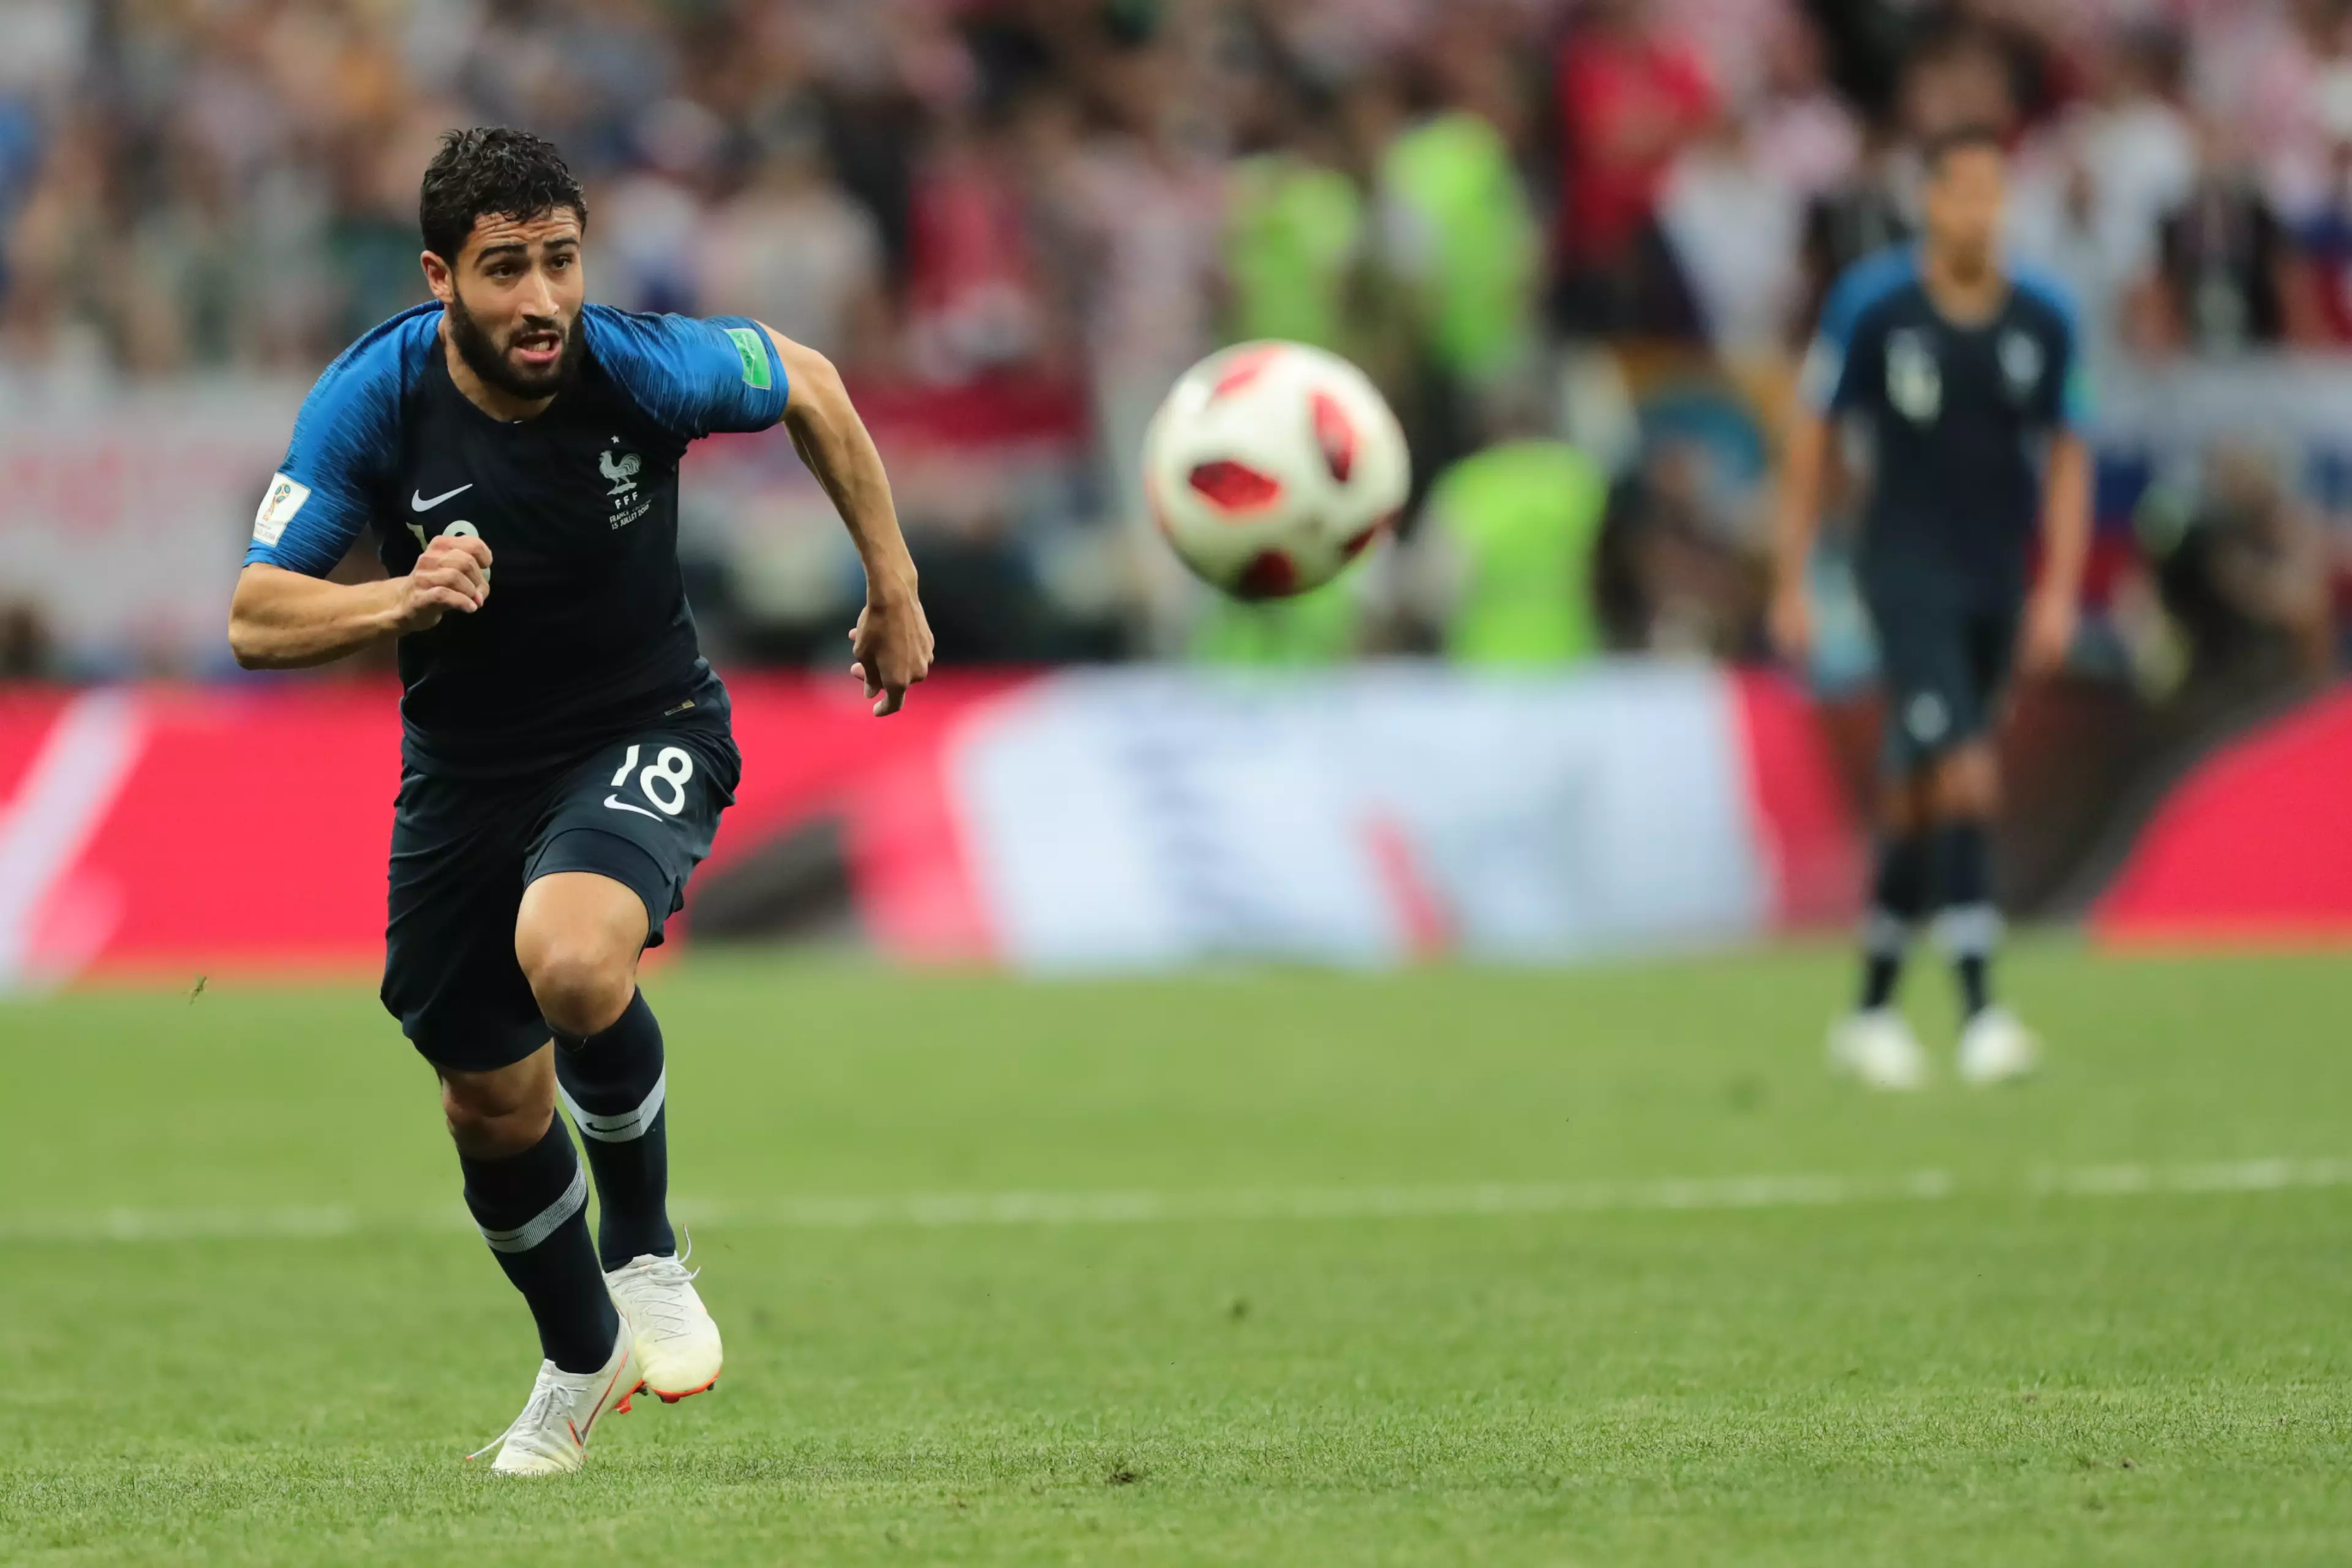 Fekir came off the bench in the Champions League final. Image: PA Images